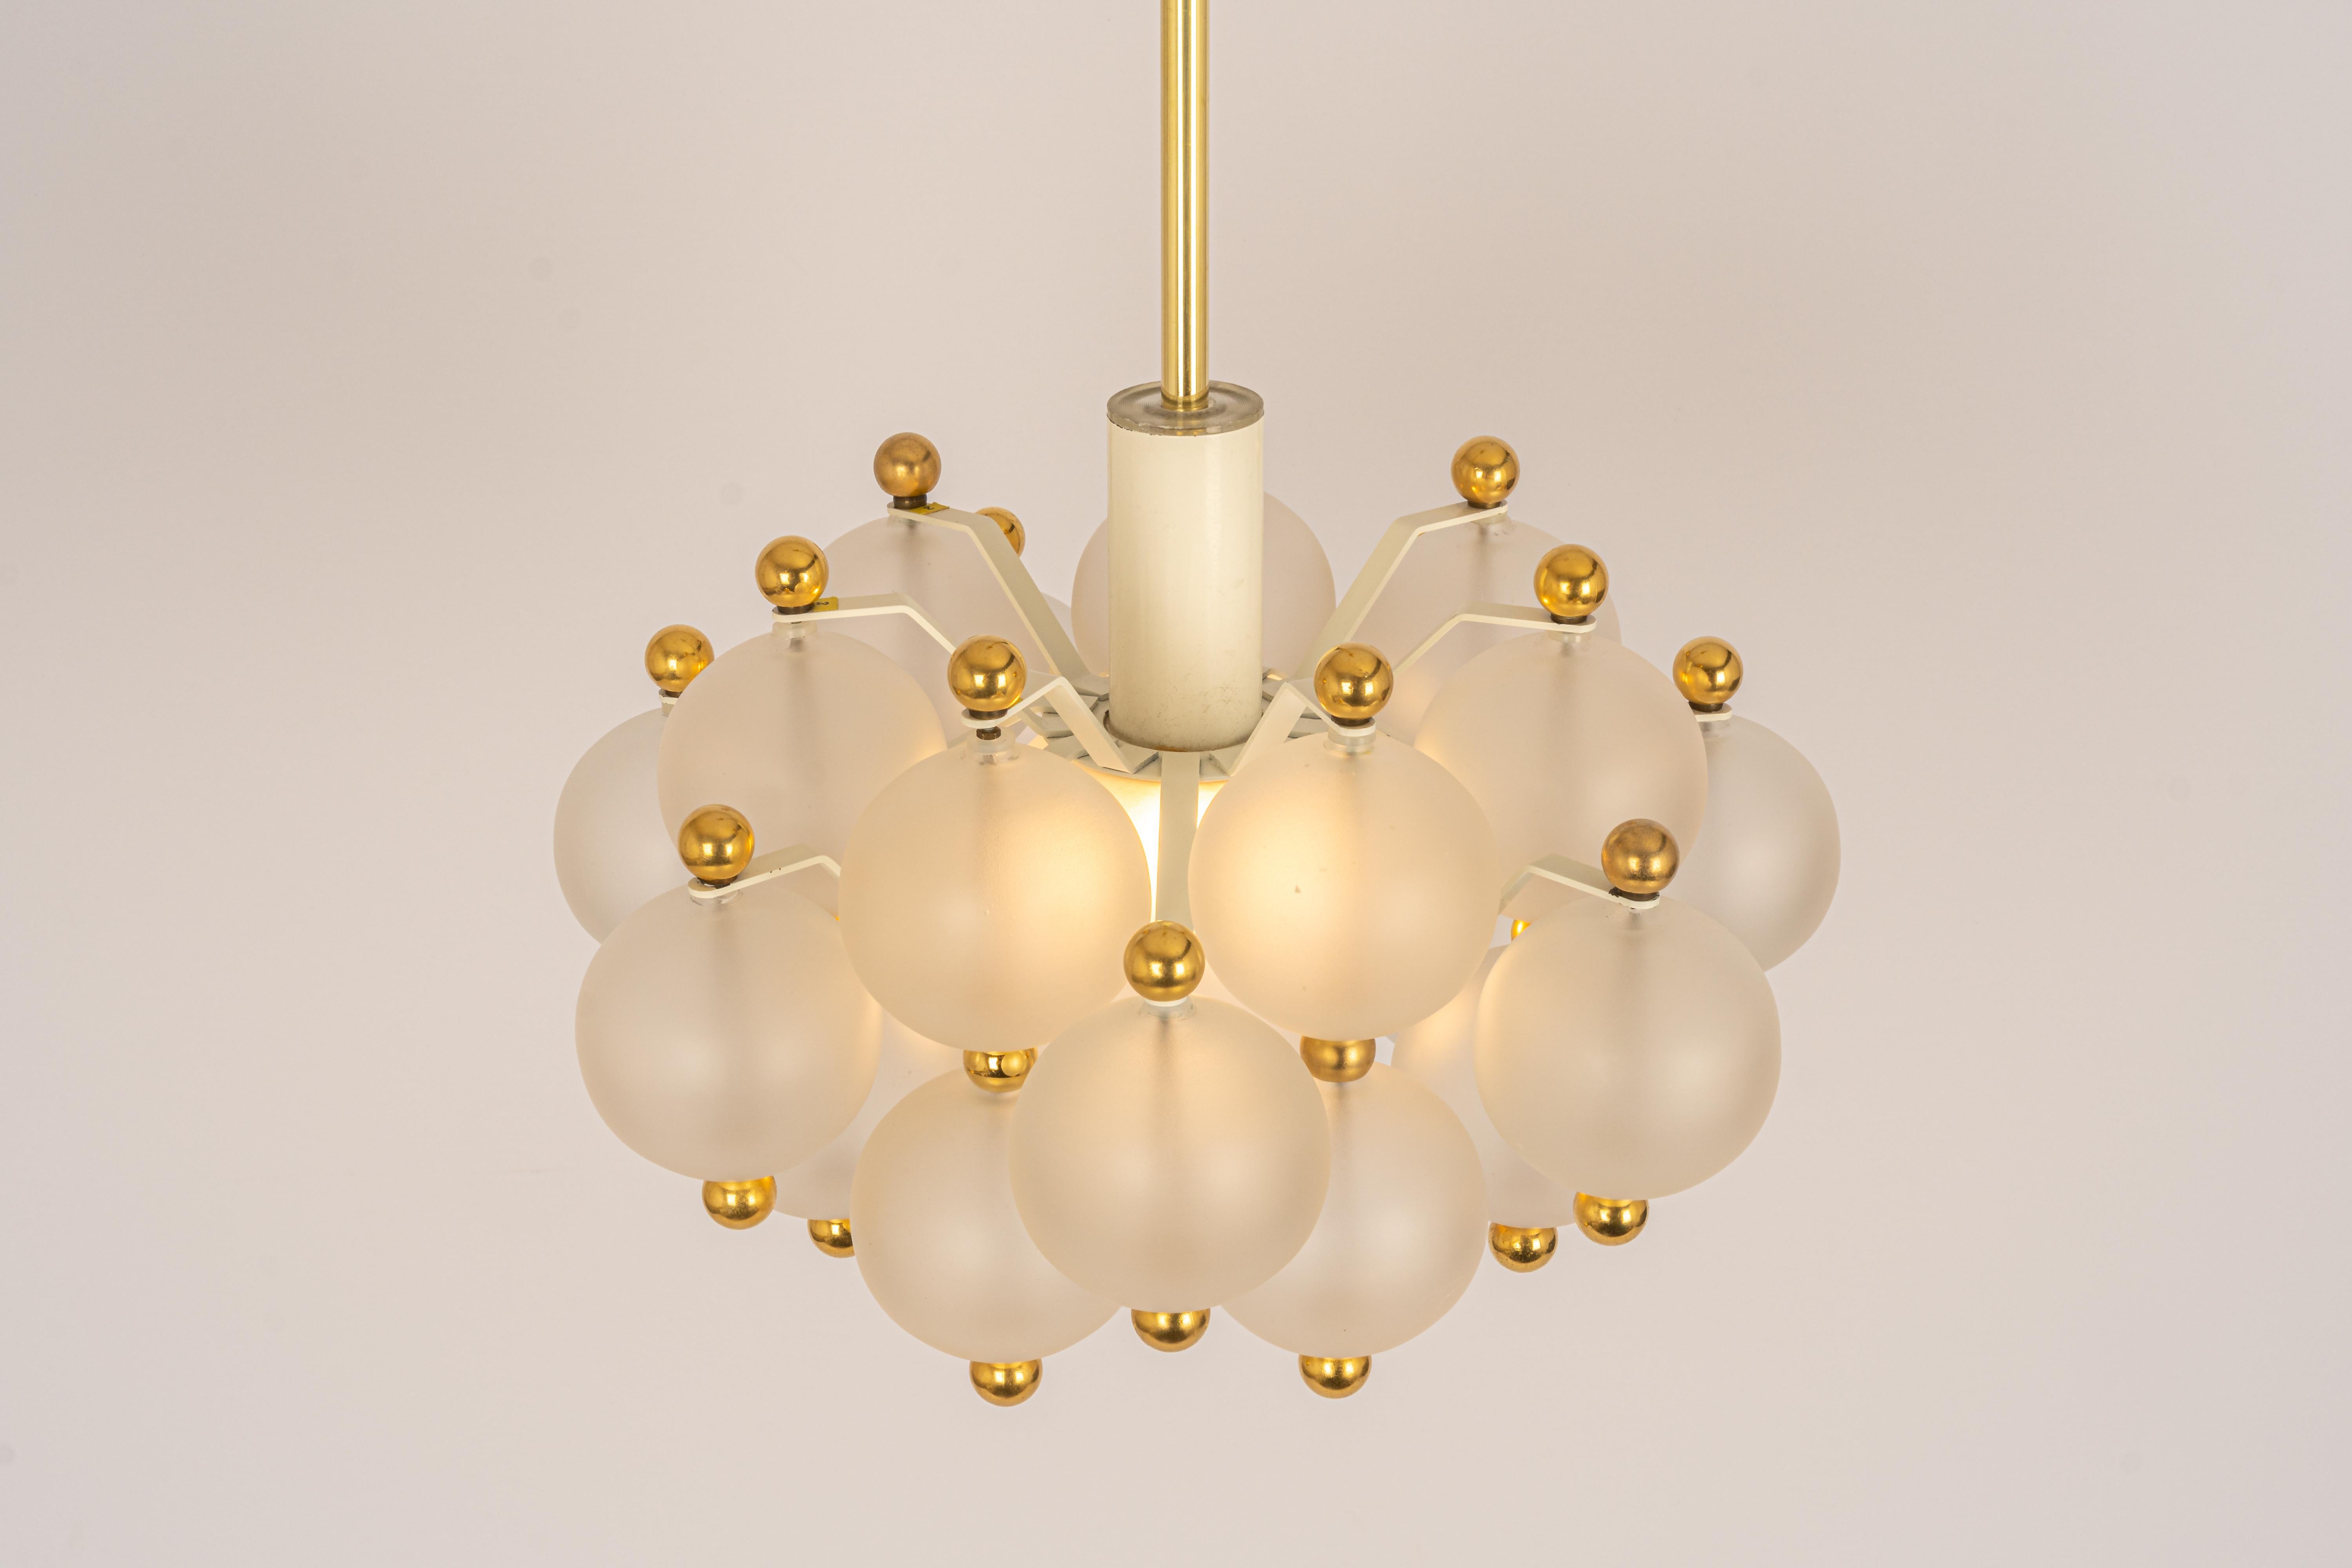 A stunning frosted glass and brass chandelier by Kinkeldey, Germany, 1970s

Sockets: One x E27/E26 standard bulb (100 Watt), and it function on voltage from 110 till 240 volts.
Light bulbs are not included. It is possible to install this fixture